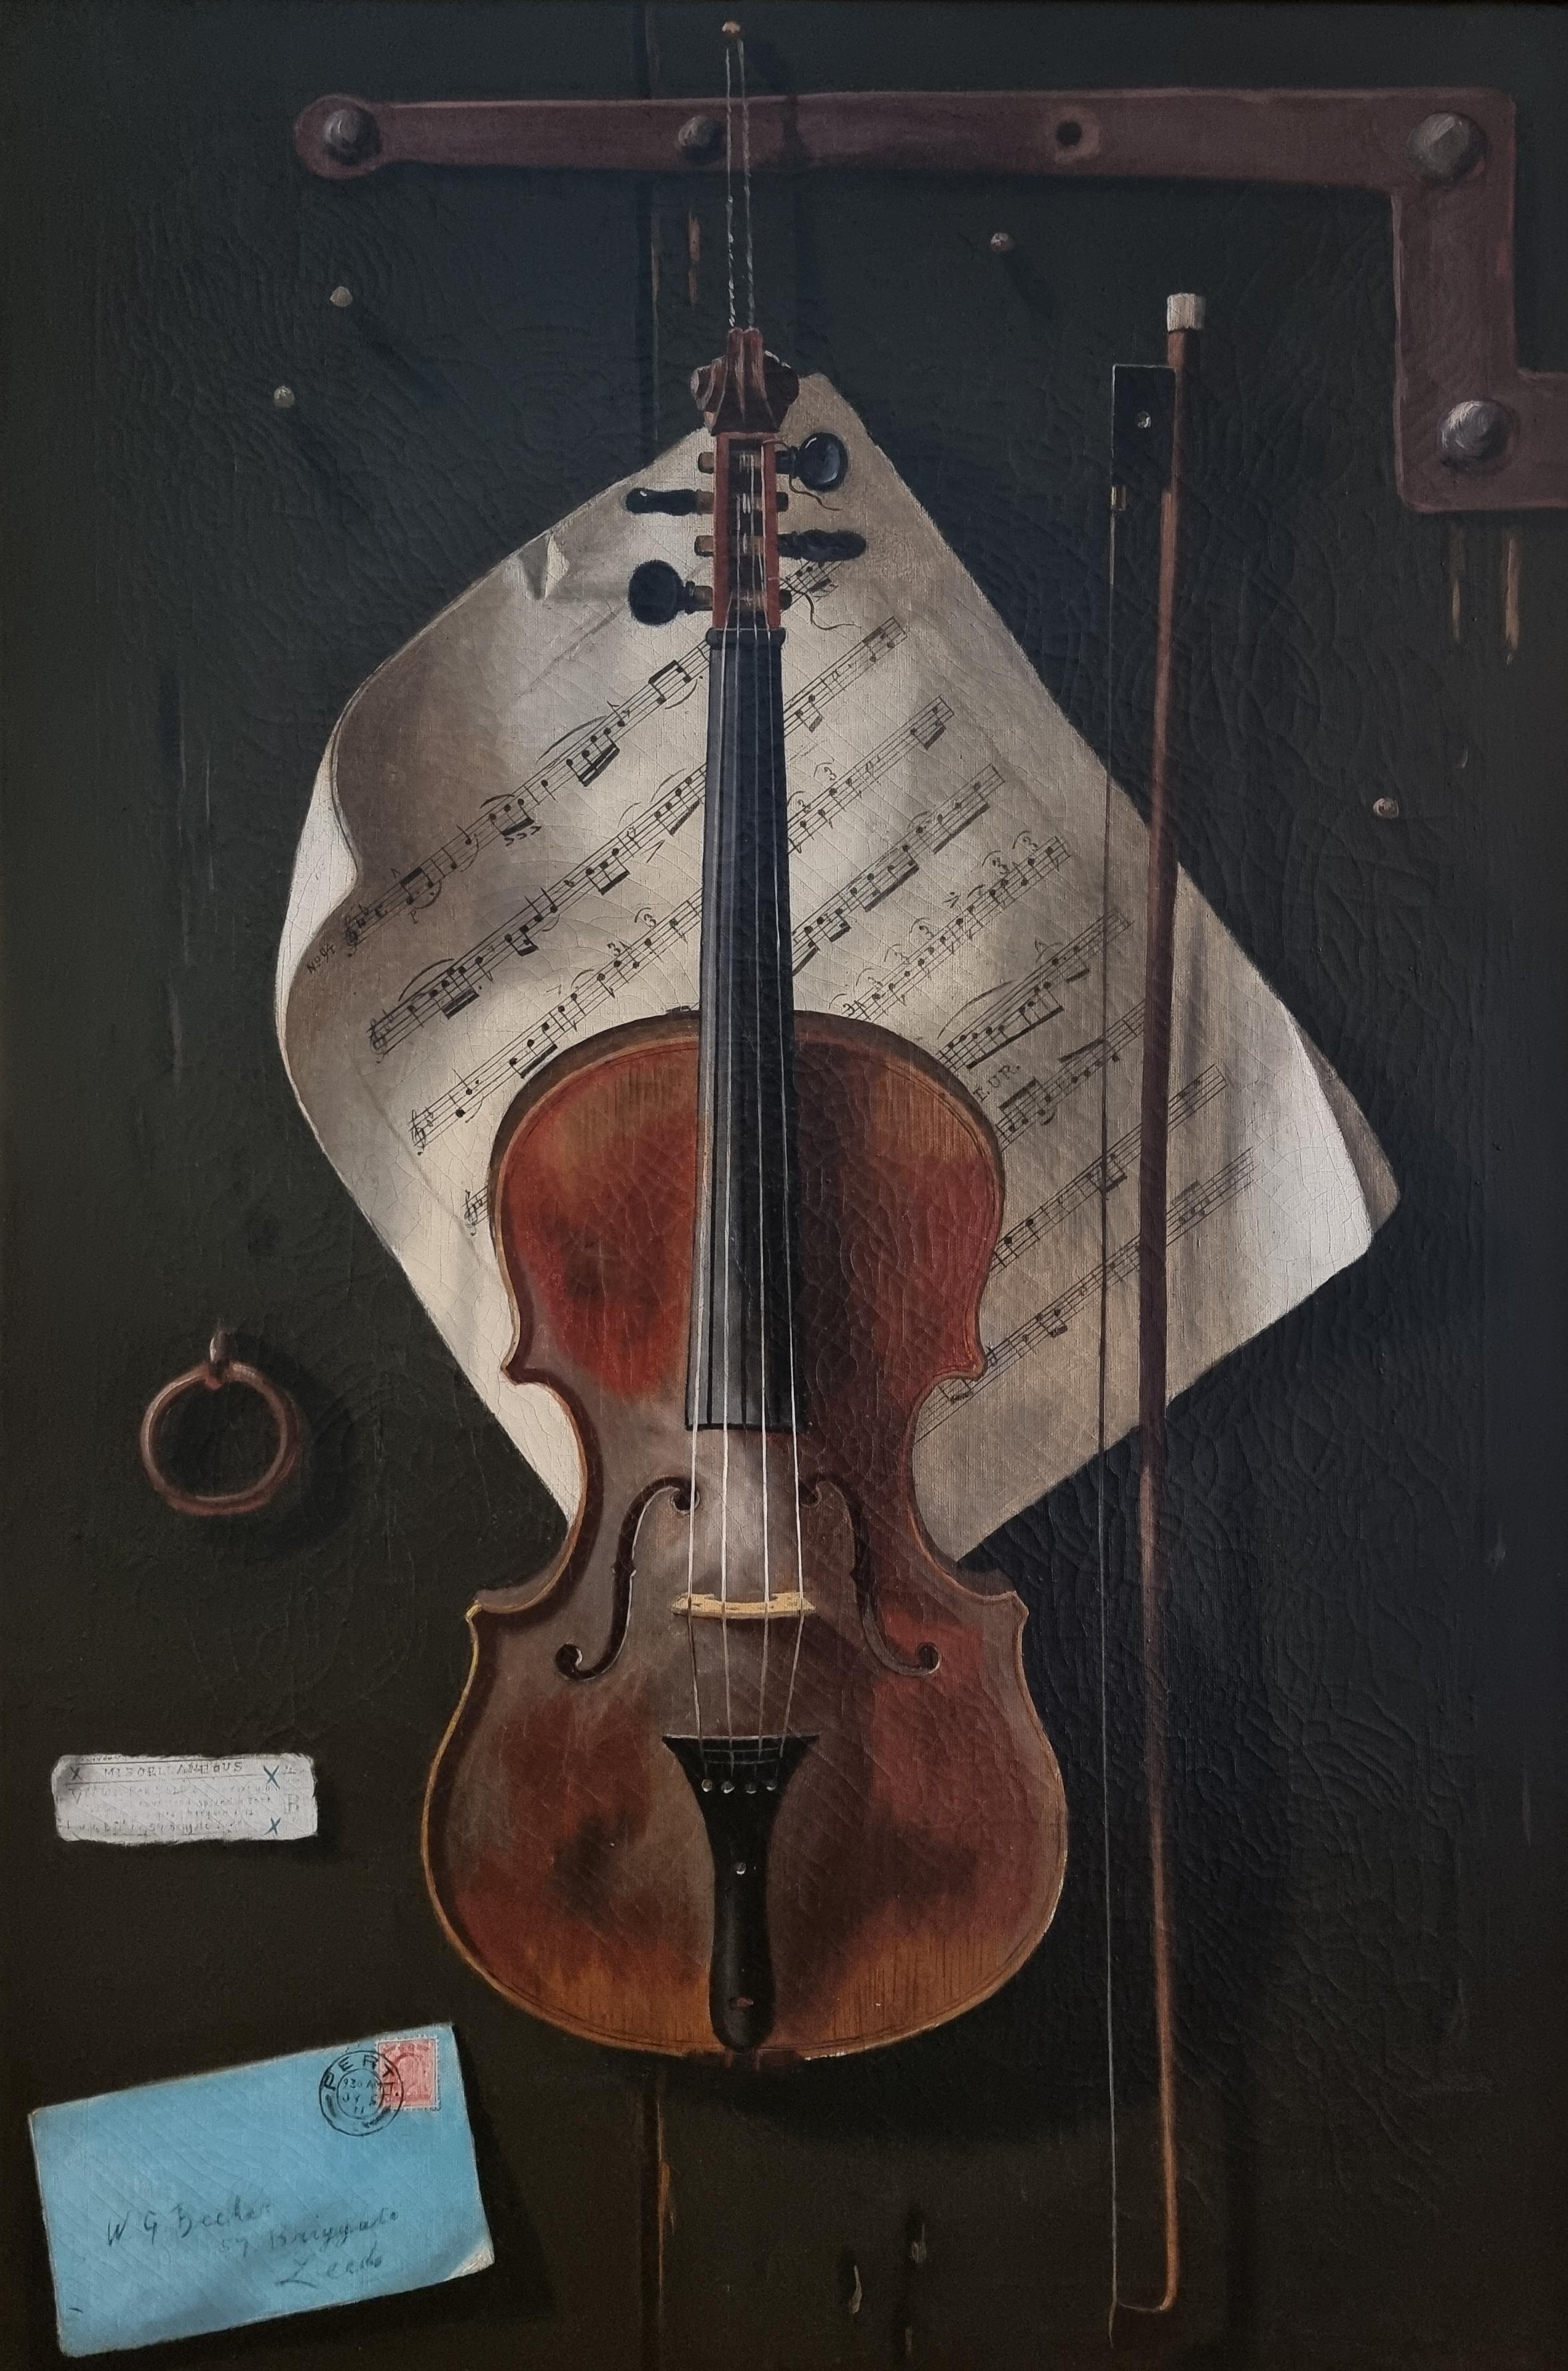 W. G. BECKER Interior Painting - Trompe l'oeil, Still Life with Violin by W G Becker, Oil on Canvas